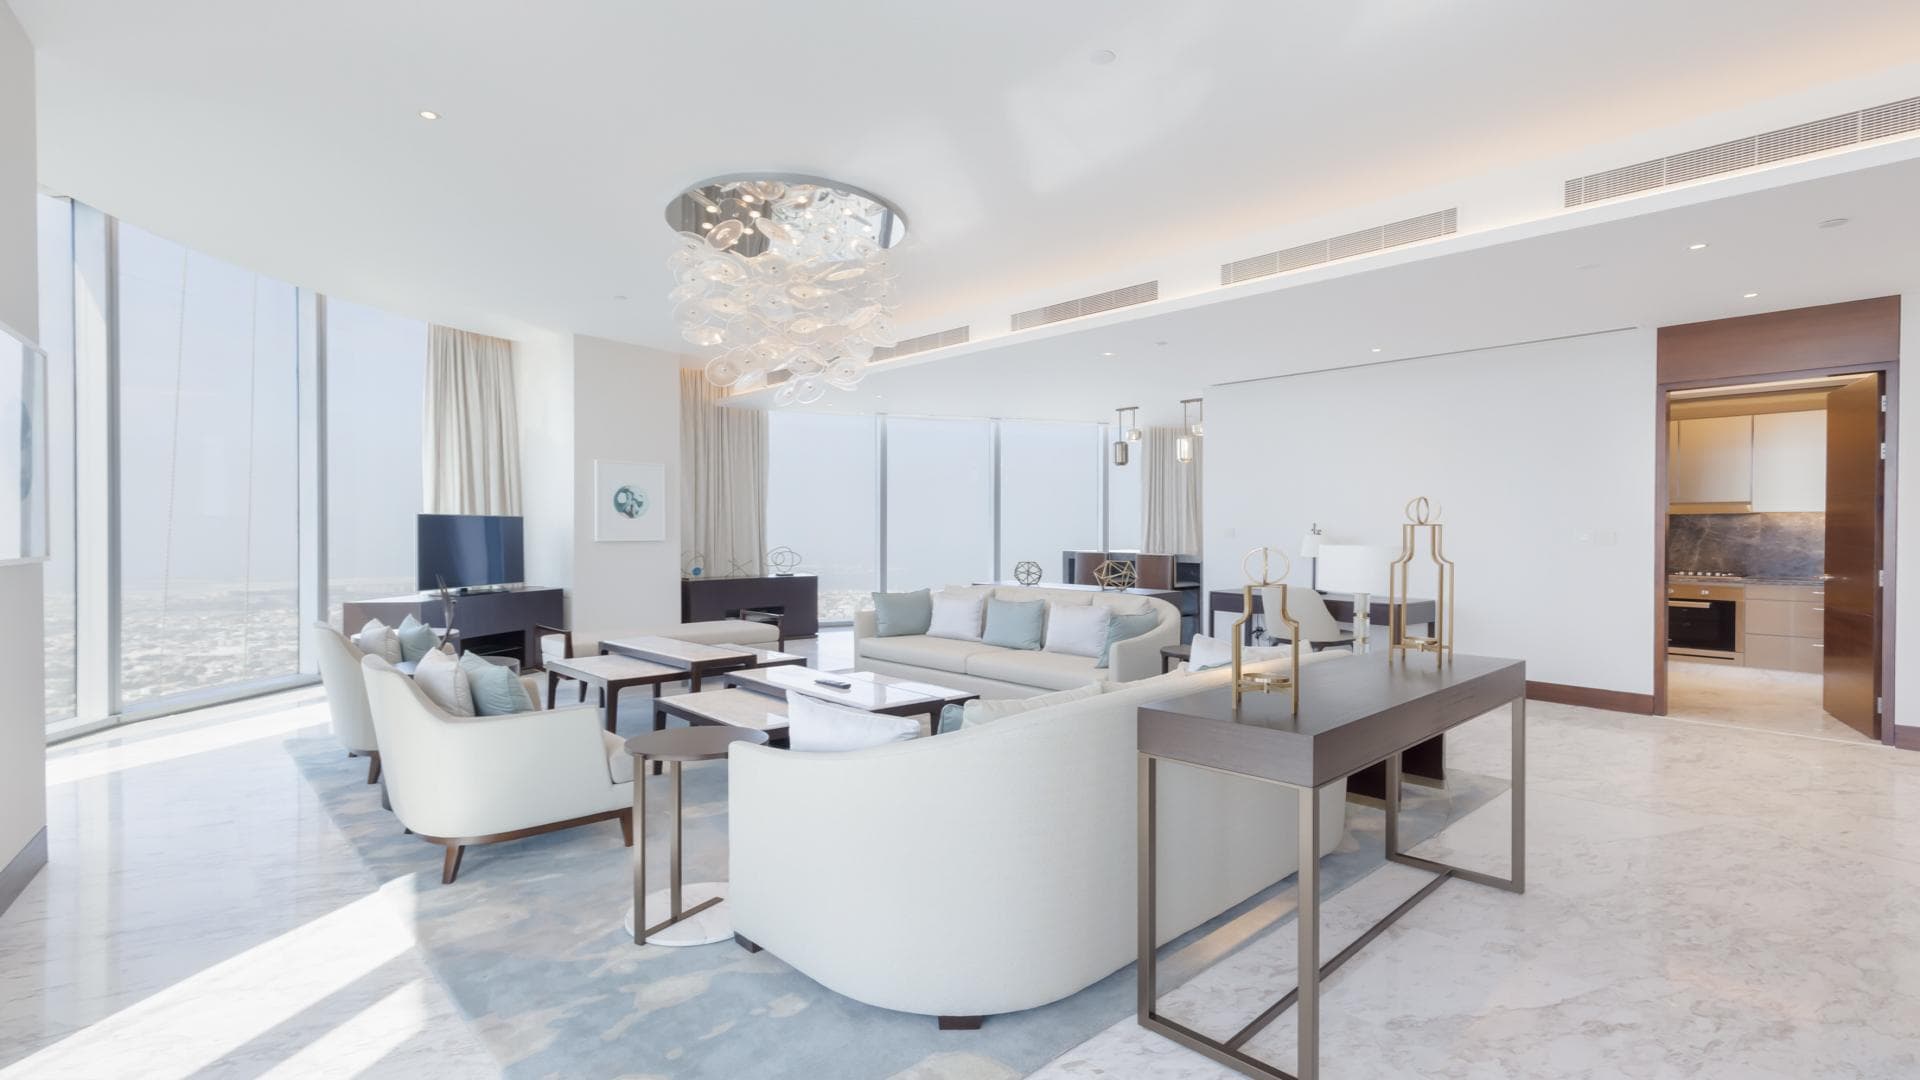 4 Bedroom Penthouse For Sale The Address Sky View Towers Lp17952 1e0f71bb791e9c00.jpg